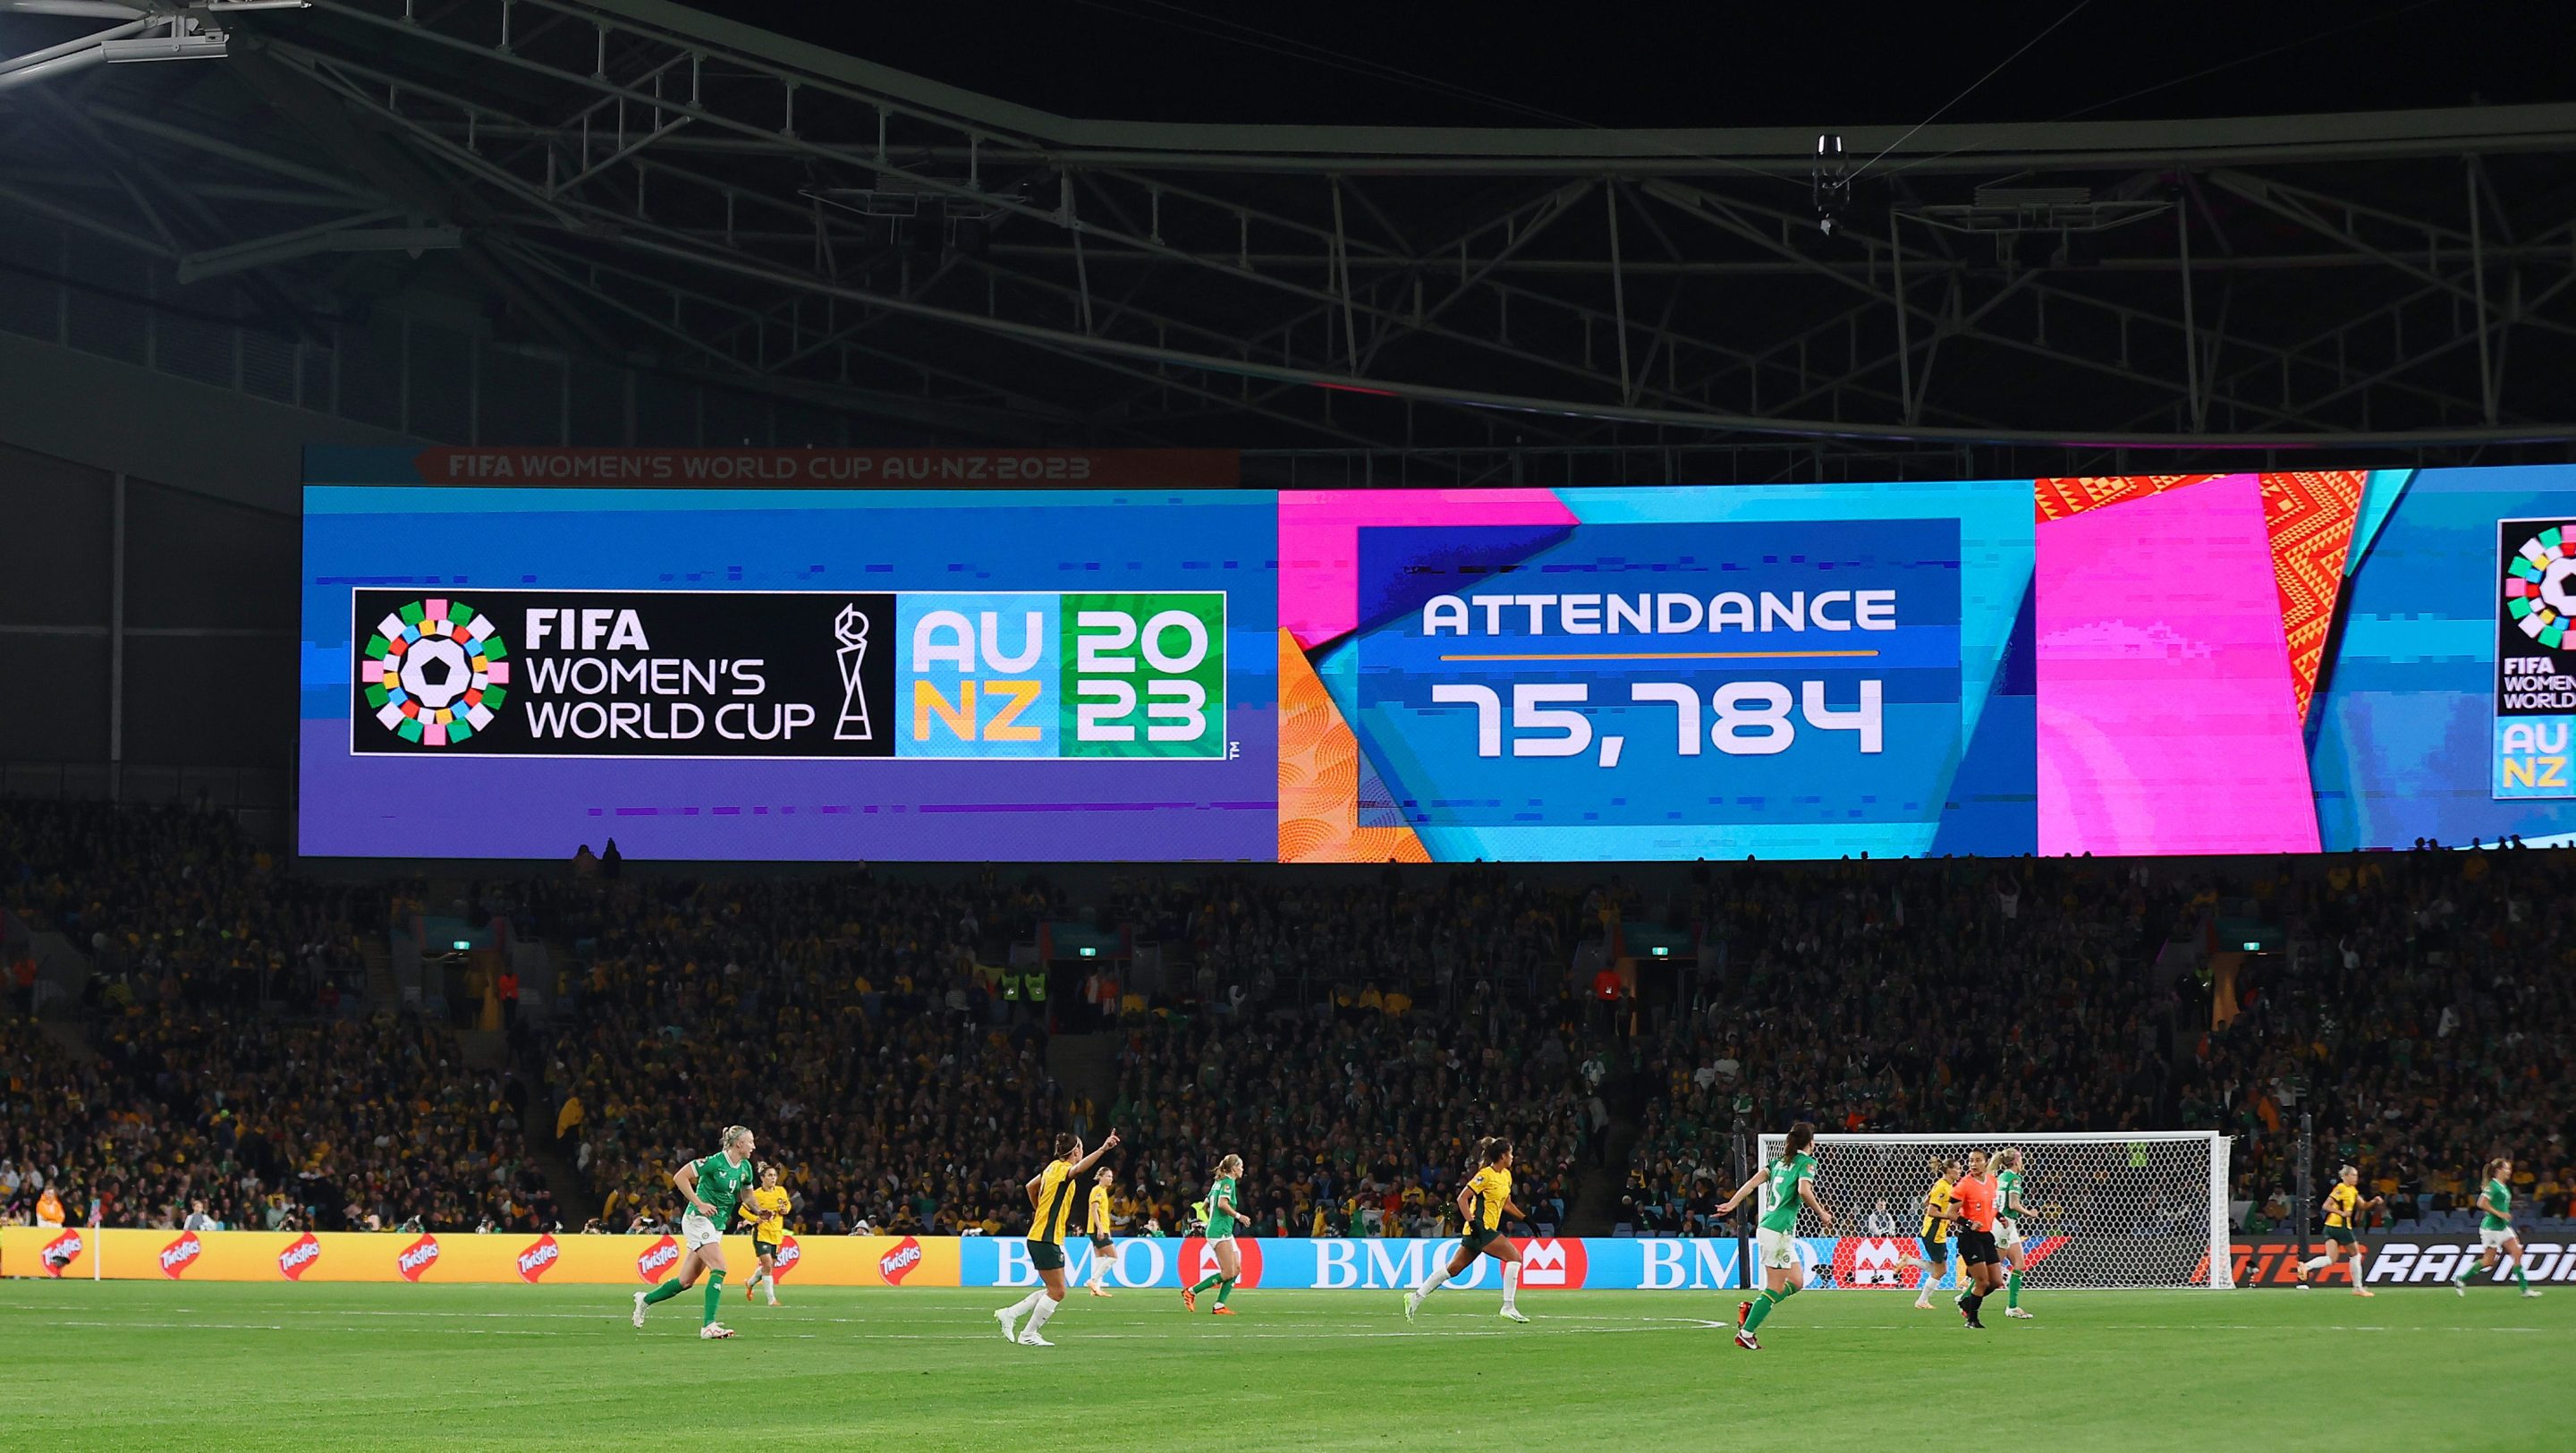 Womens World Cup likely to draw bigger crowds, revenue